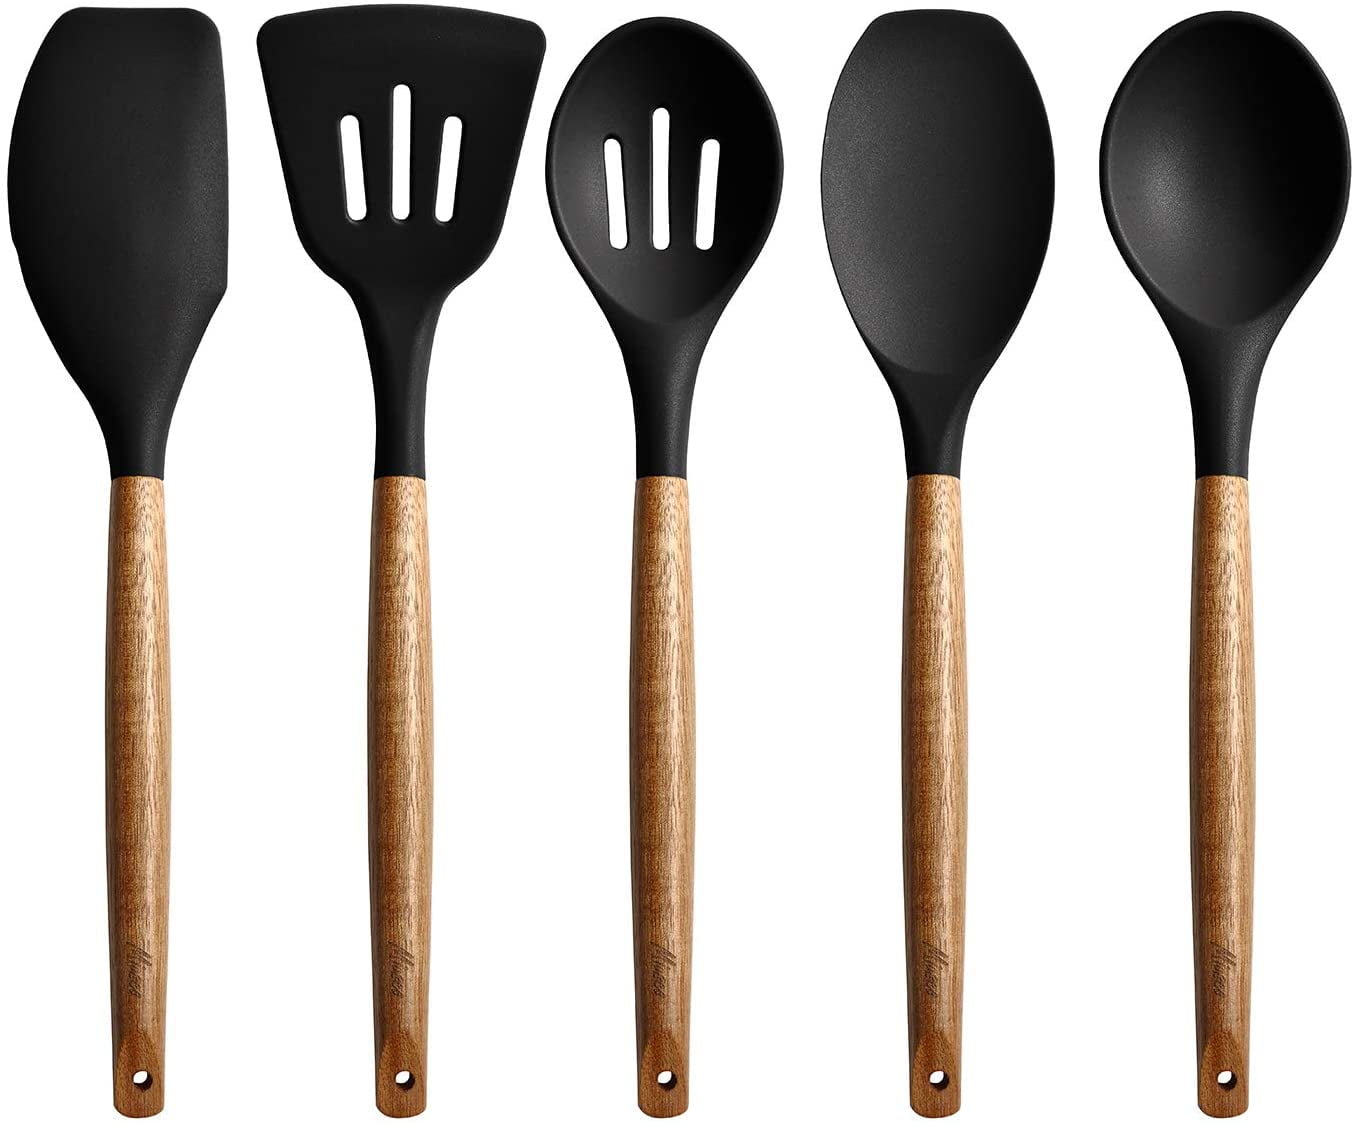 Maphyton Silicone Cooking Utensils 6 Pieces Nonstick Kitchen Tool Set BPA Free with Natural Acacia Hard Wood Handle Grey 